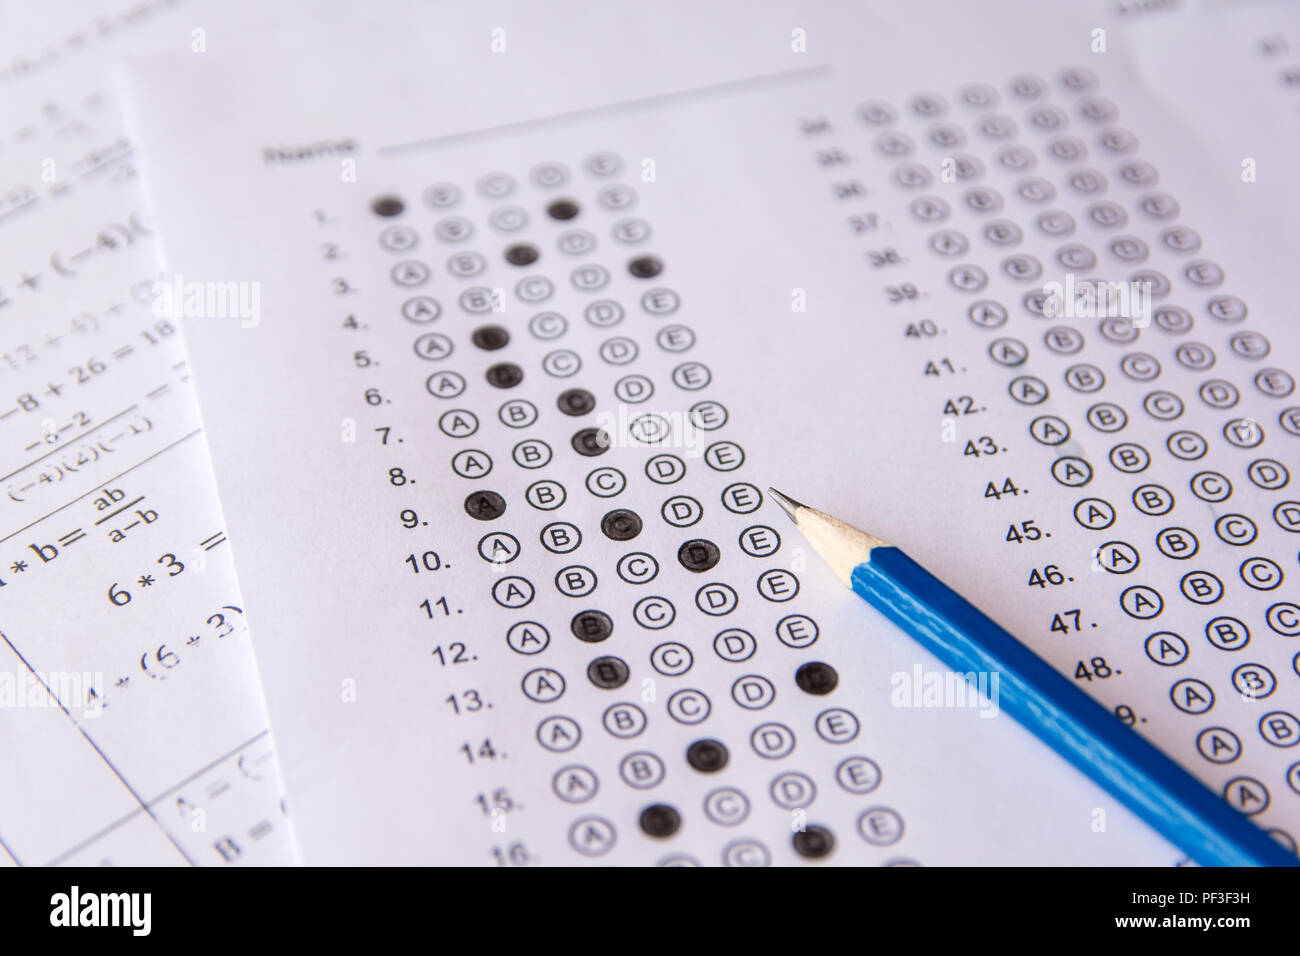 Pencil on answer sheets or Standardized test form with answers bubbled. multiple choice answer sheet Stock Photo